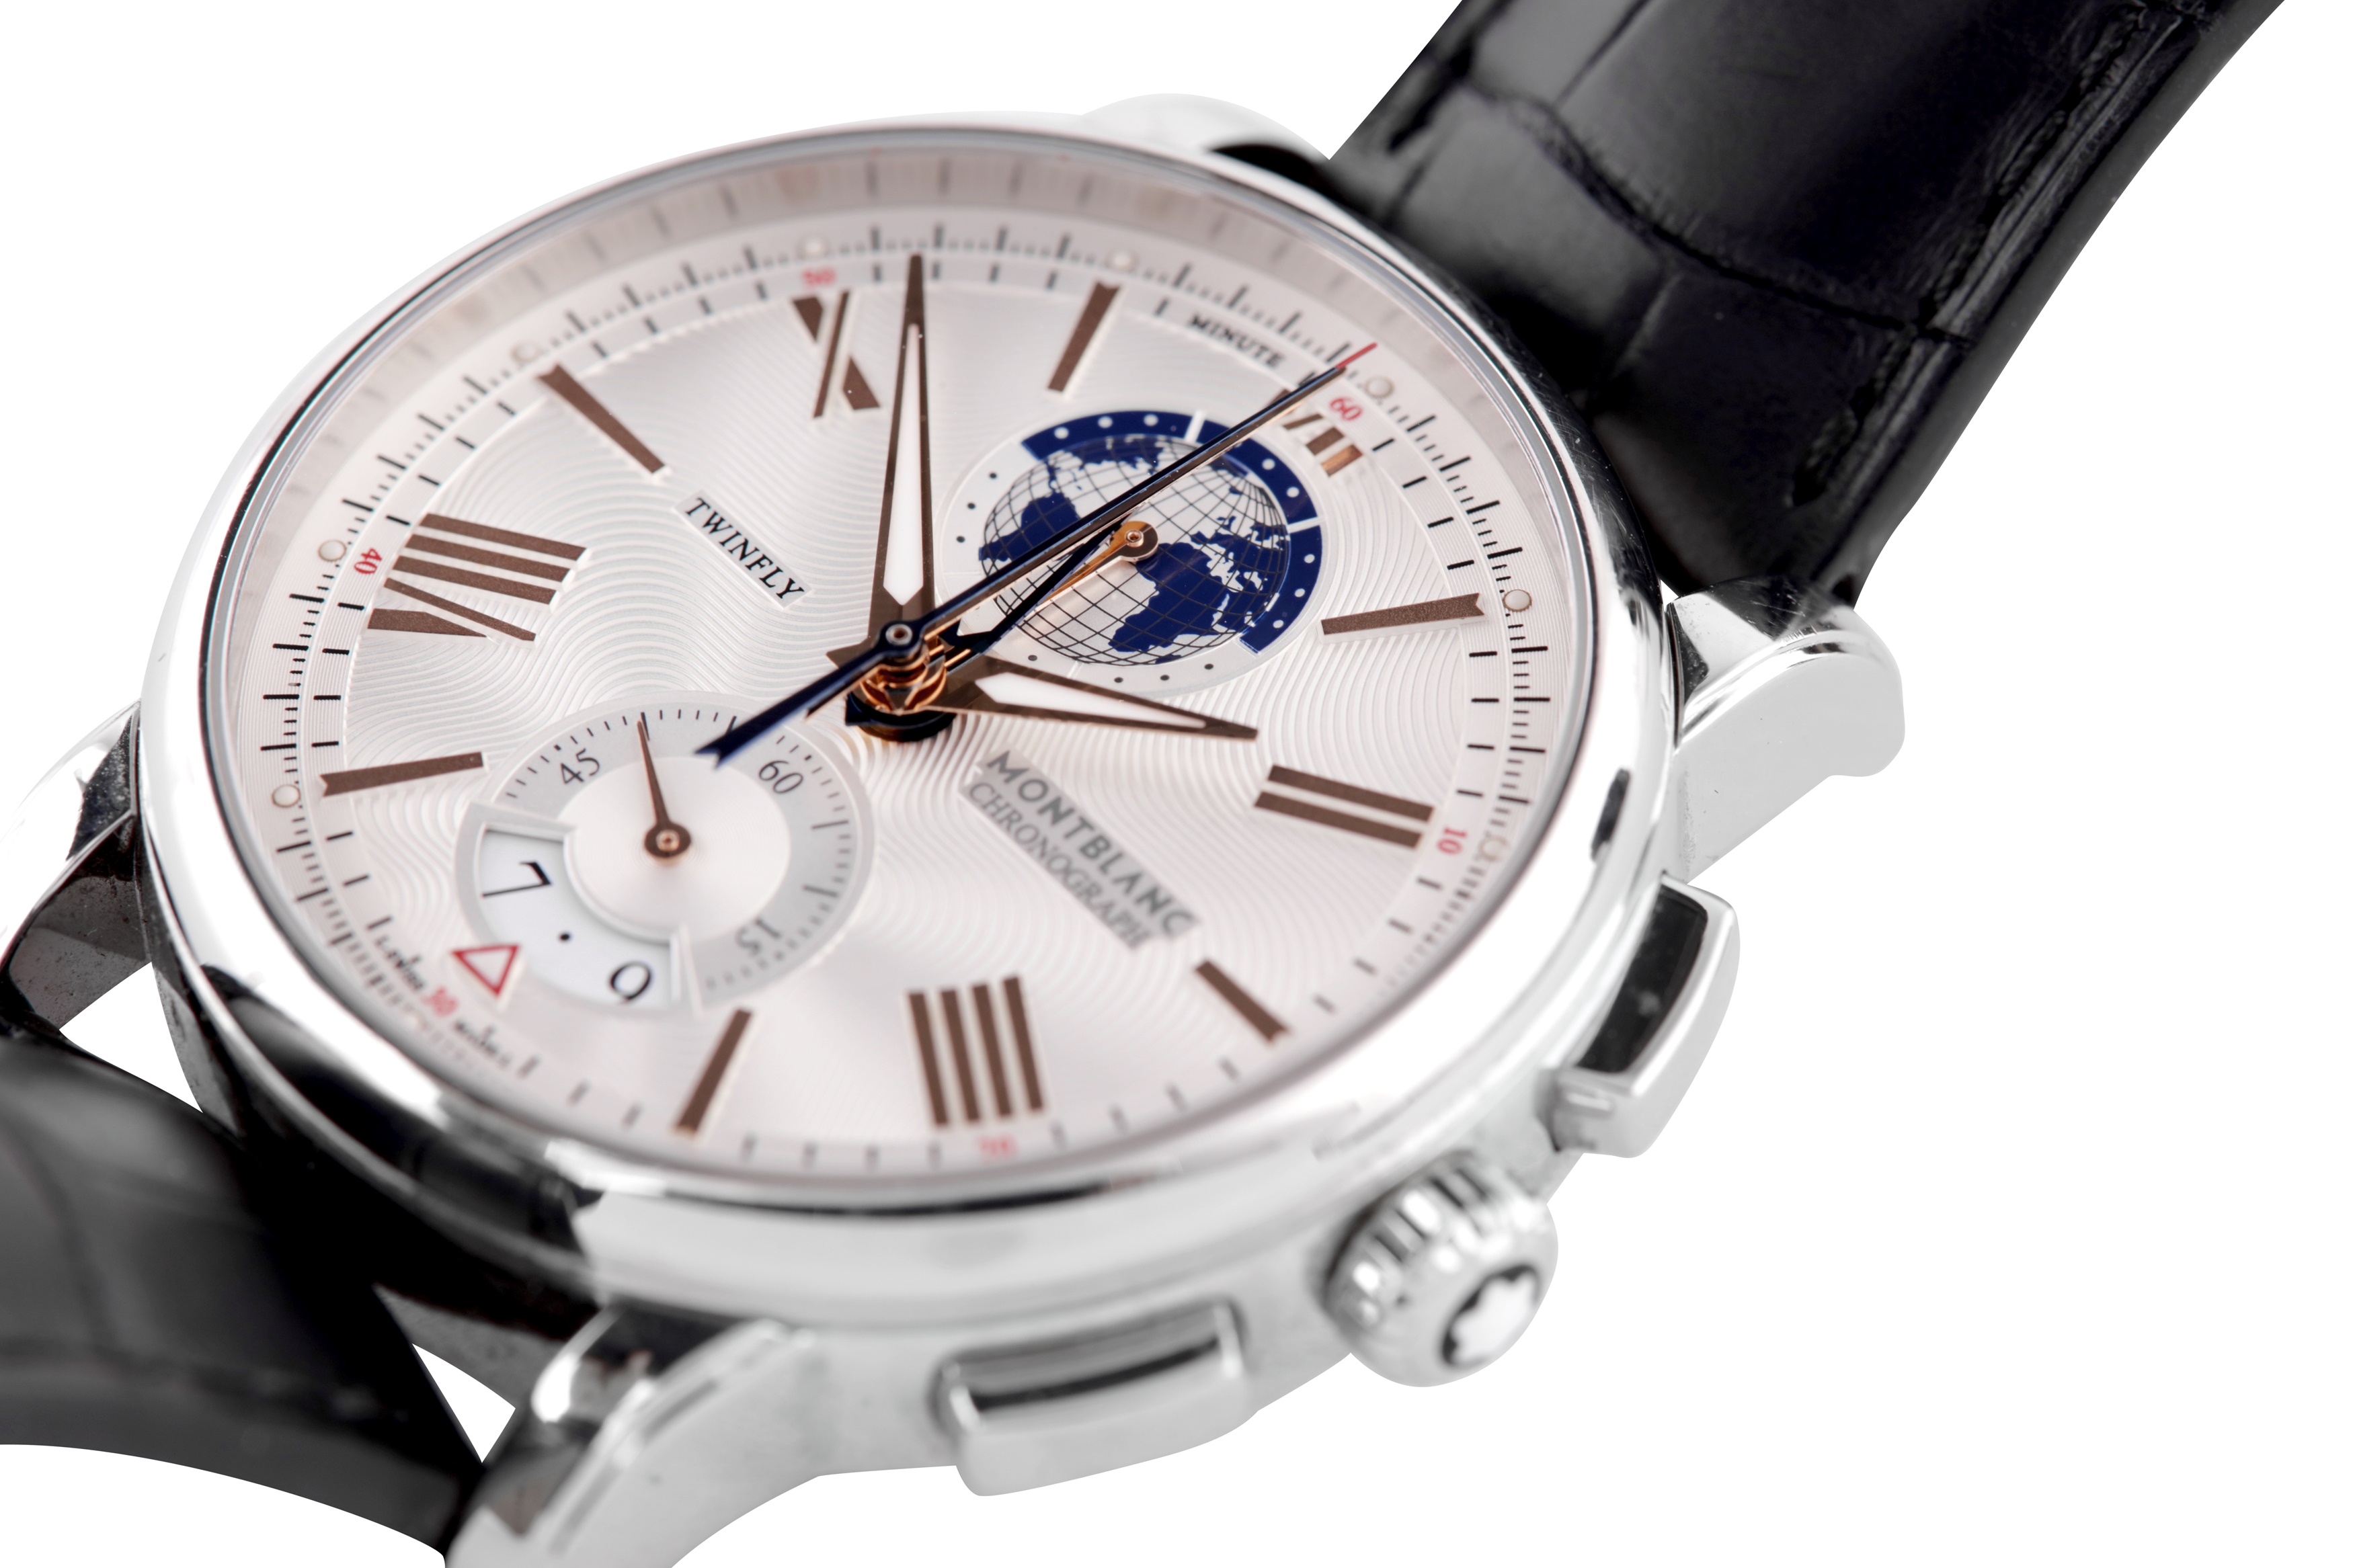 MONTBLANC. 4810 TWINFLY CHRONOGRAPH 110 YEARS EDITION